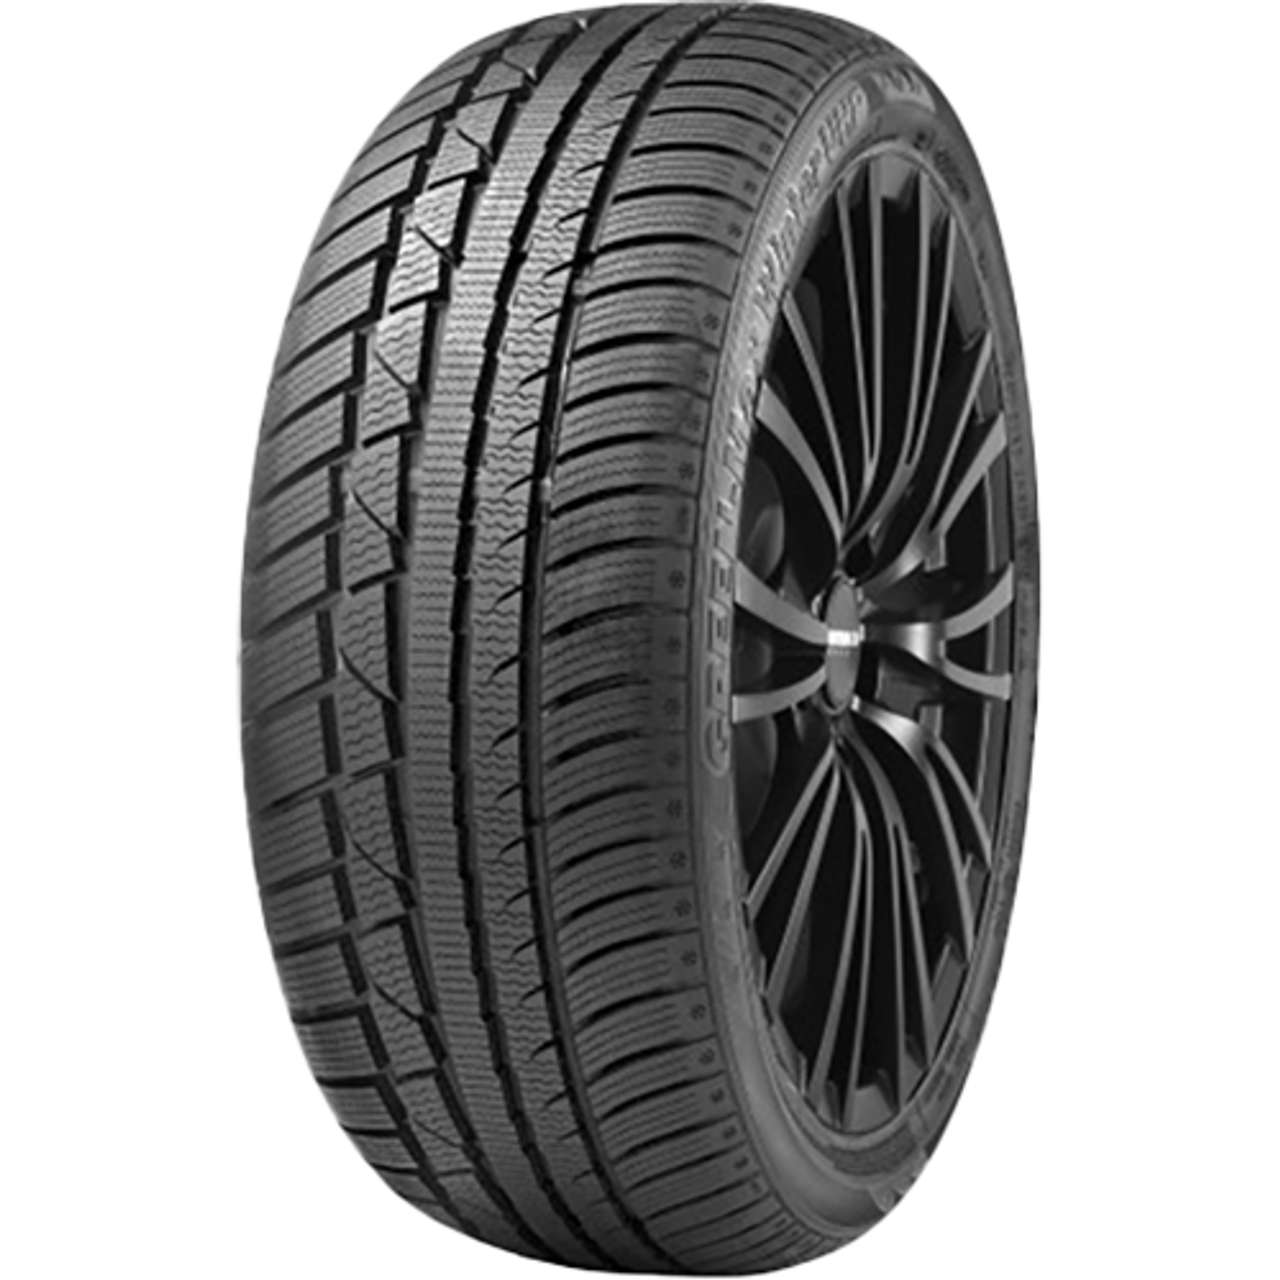 LINGLONG GREEN-MAX WINTER UHP 235/45R17 97H MFS BSW von LINGLONG